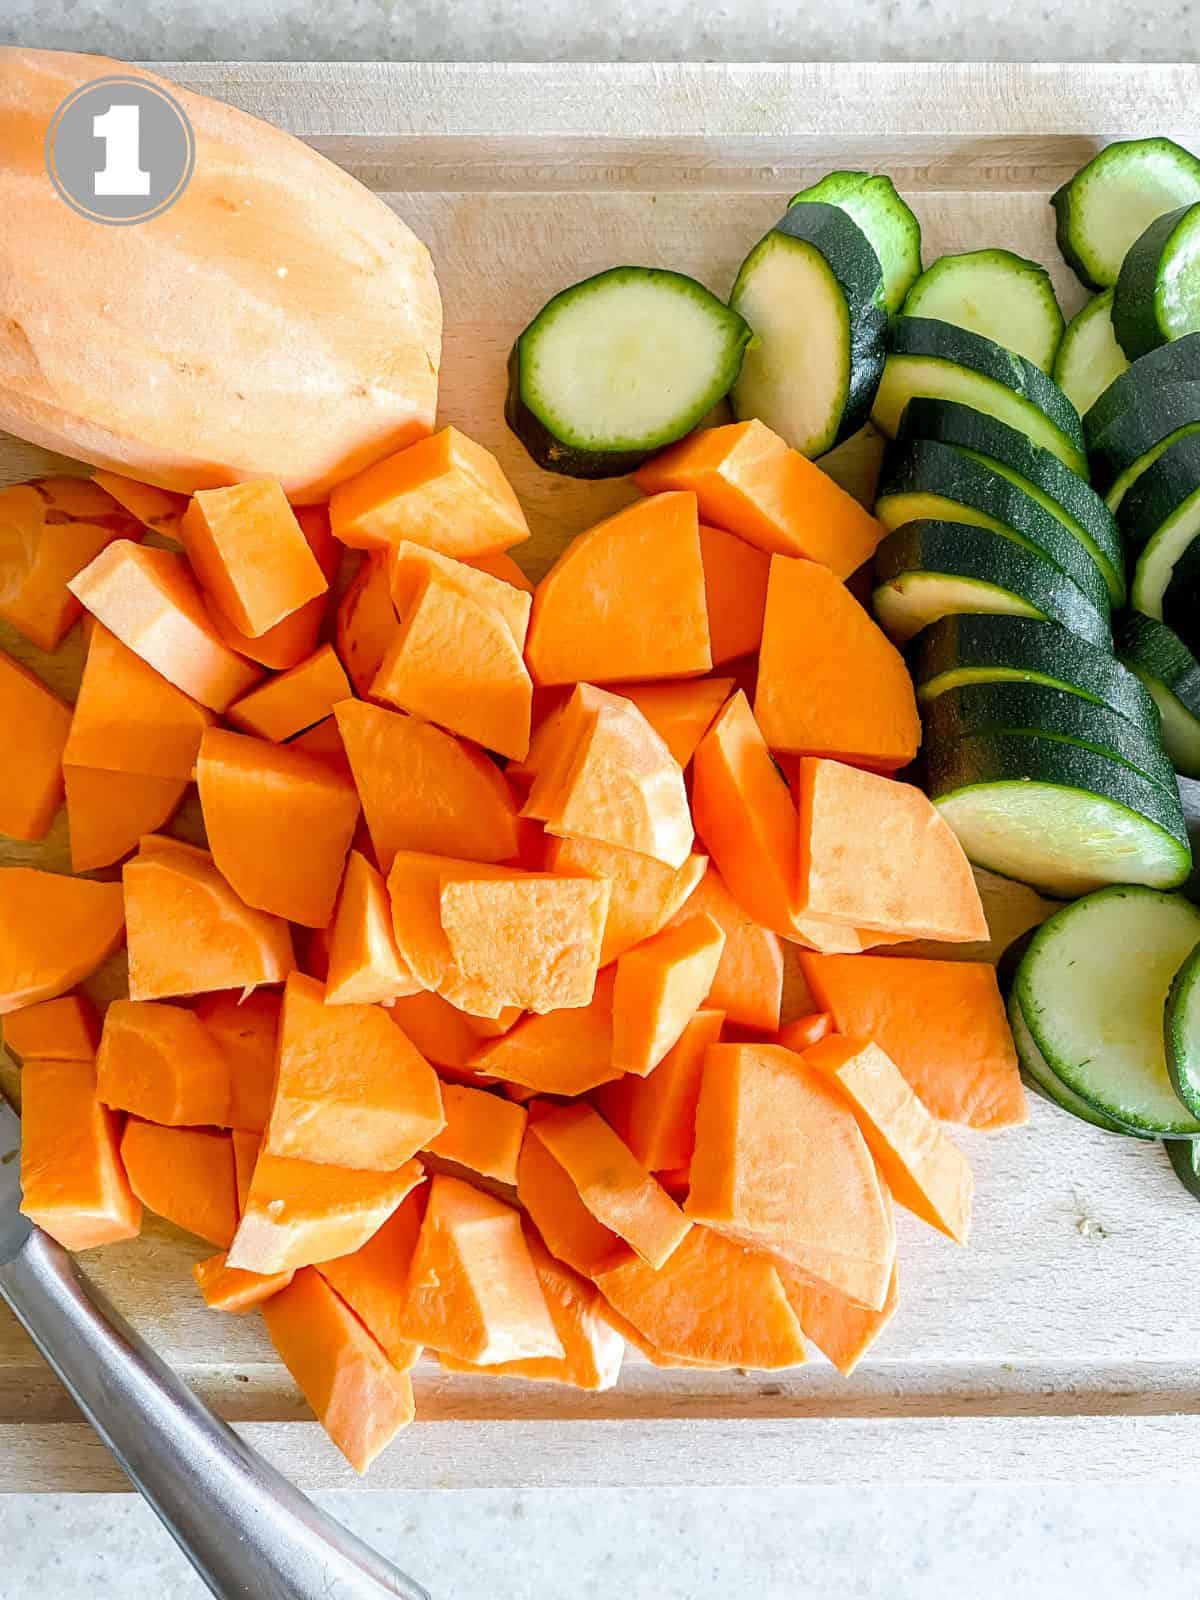 diced sweet potato and zucchini on a wooden board with a knife.